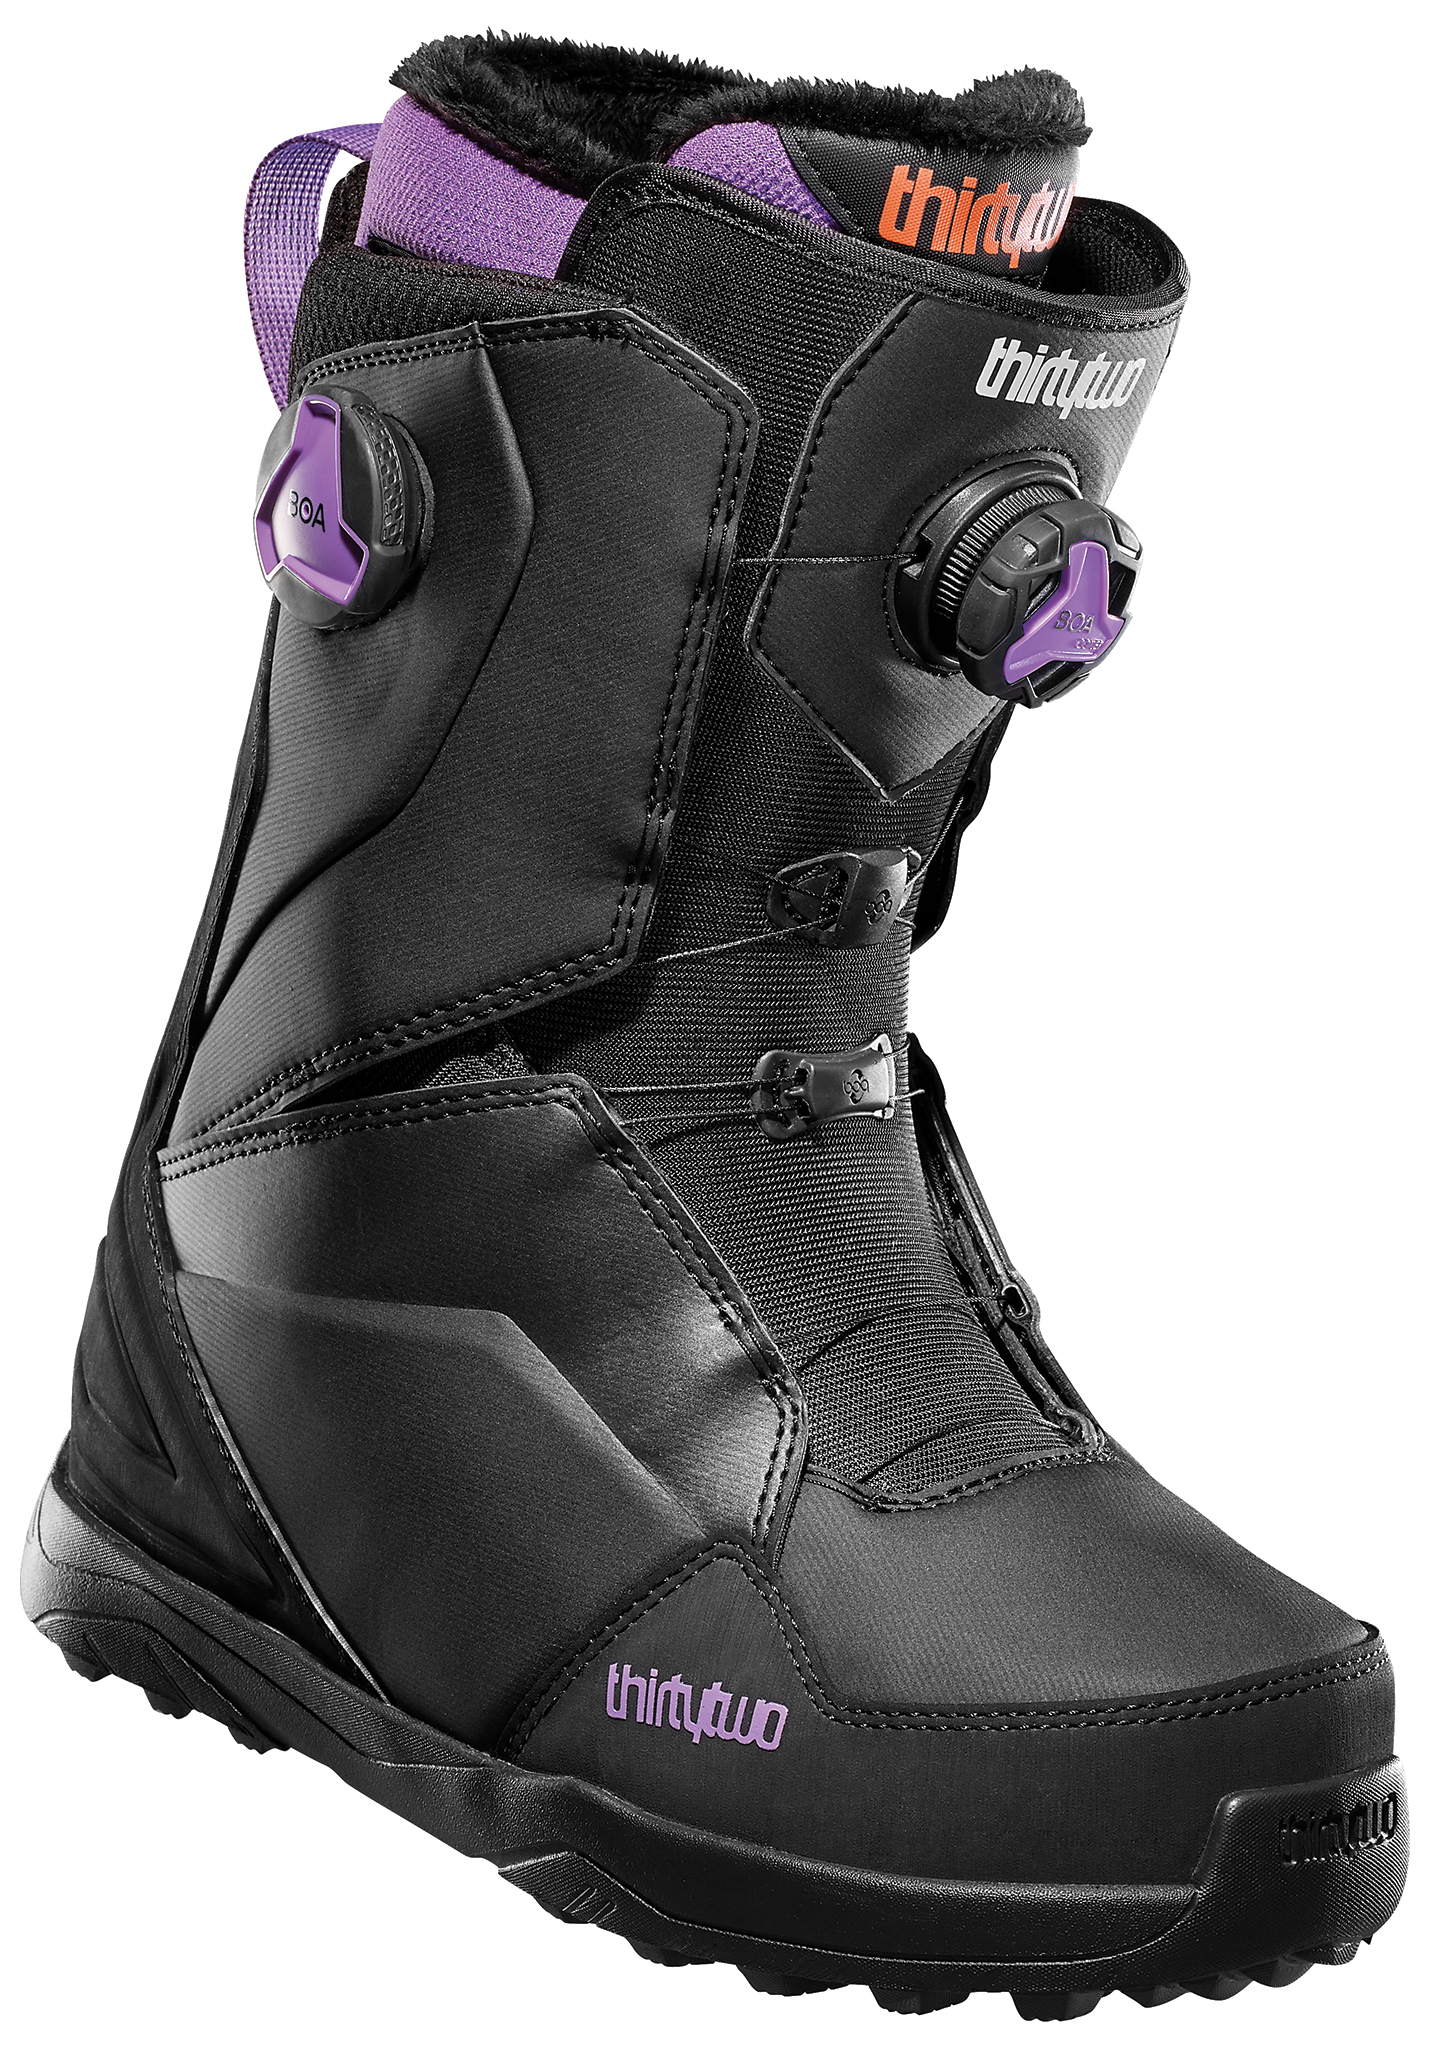 Thirtytwo Lashed Double Boa All Mountain Snowboard Boots schwarz/violett 39